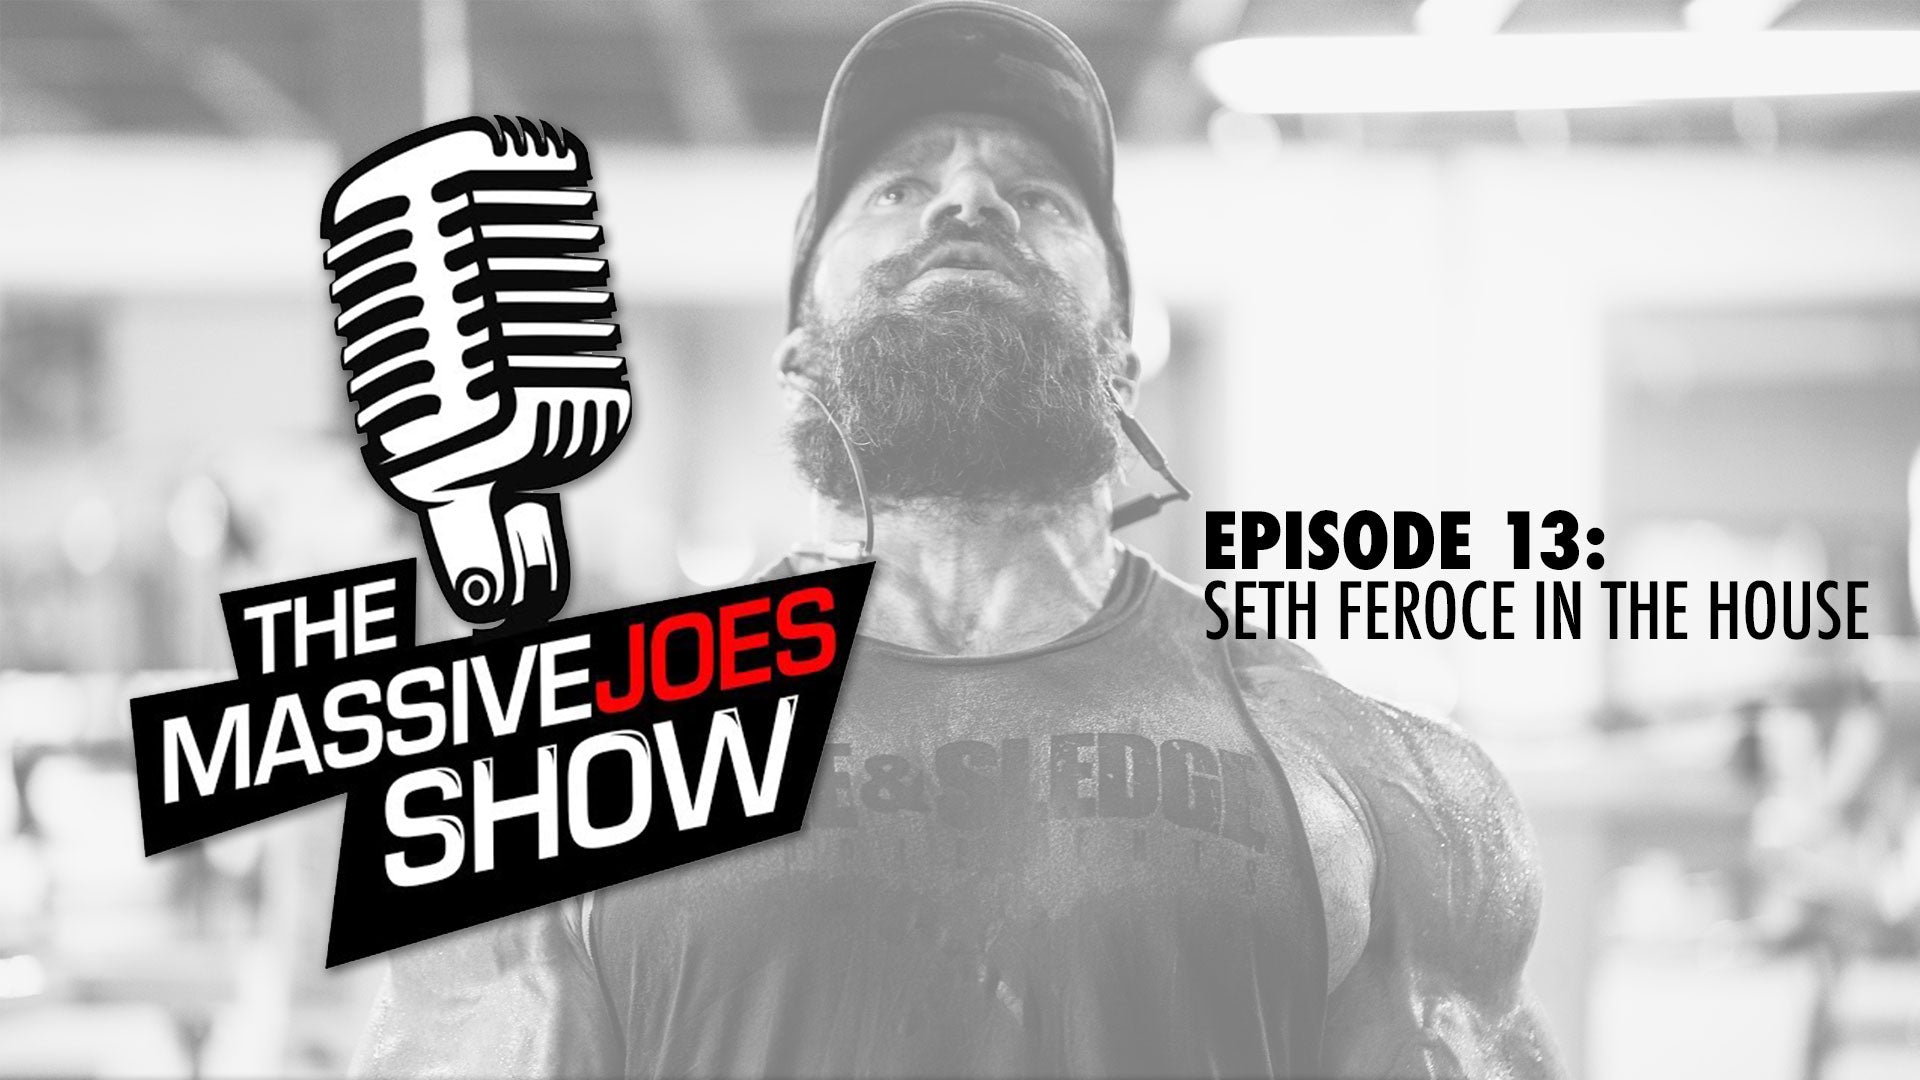 The MassiveJoes Show Episode 13: Seth Feroce In The House